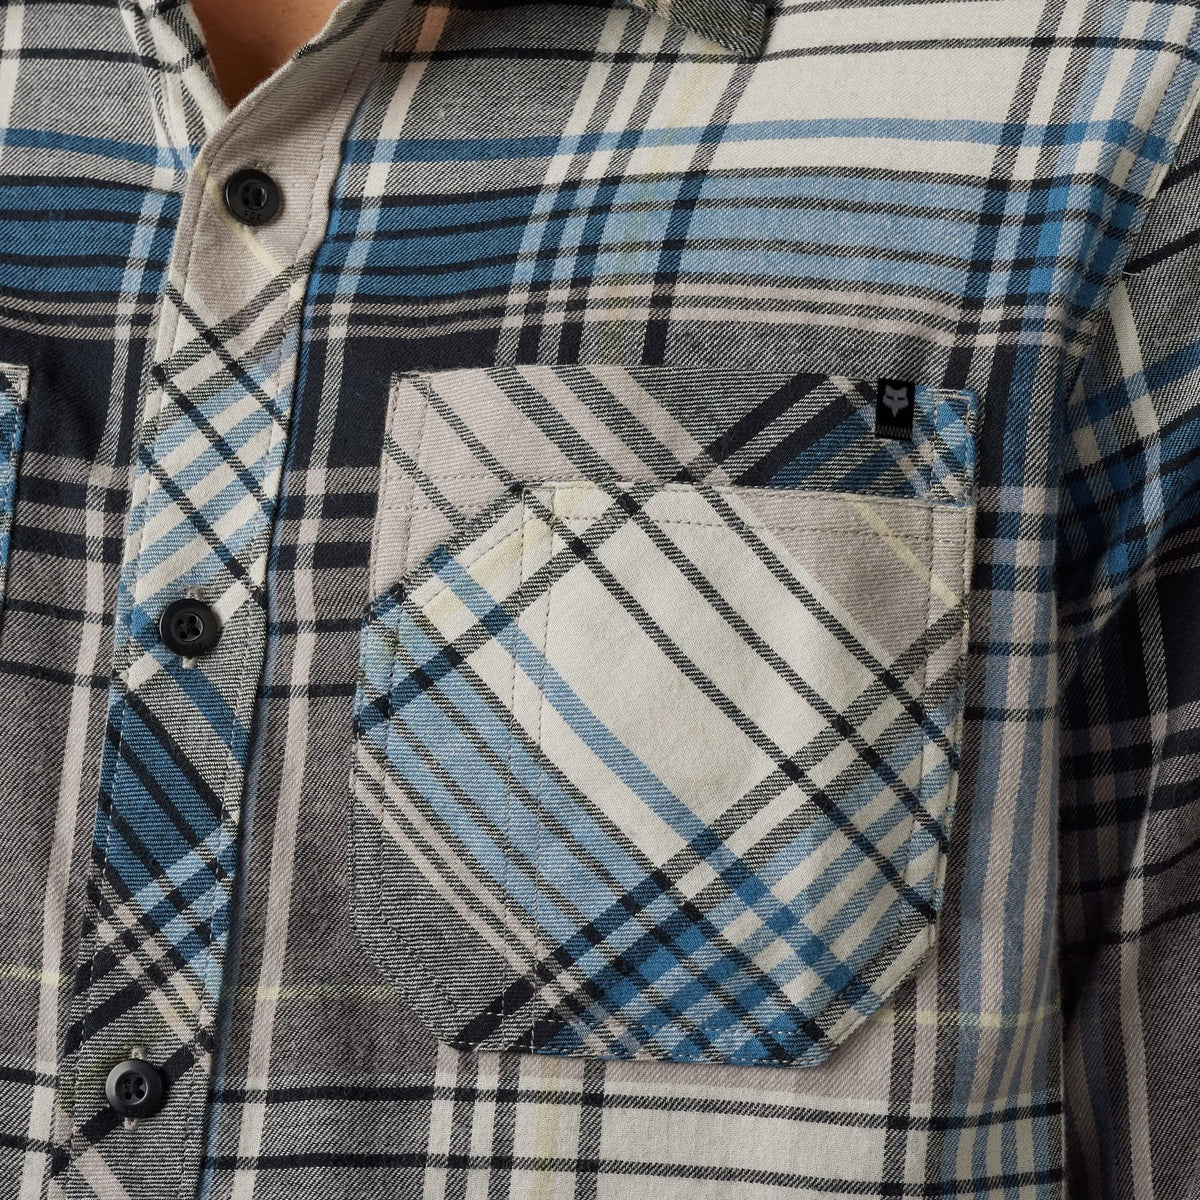 Fox Racing Turnouts Utility Flannel